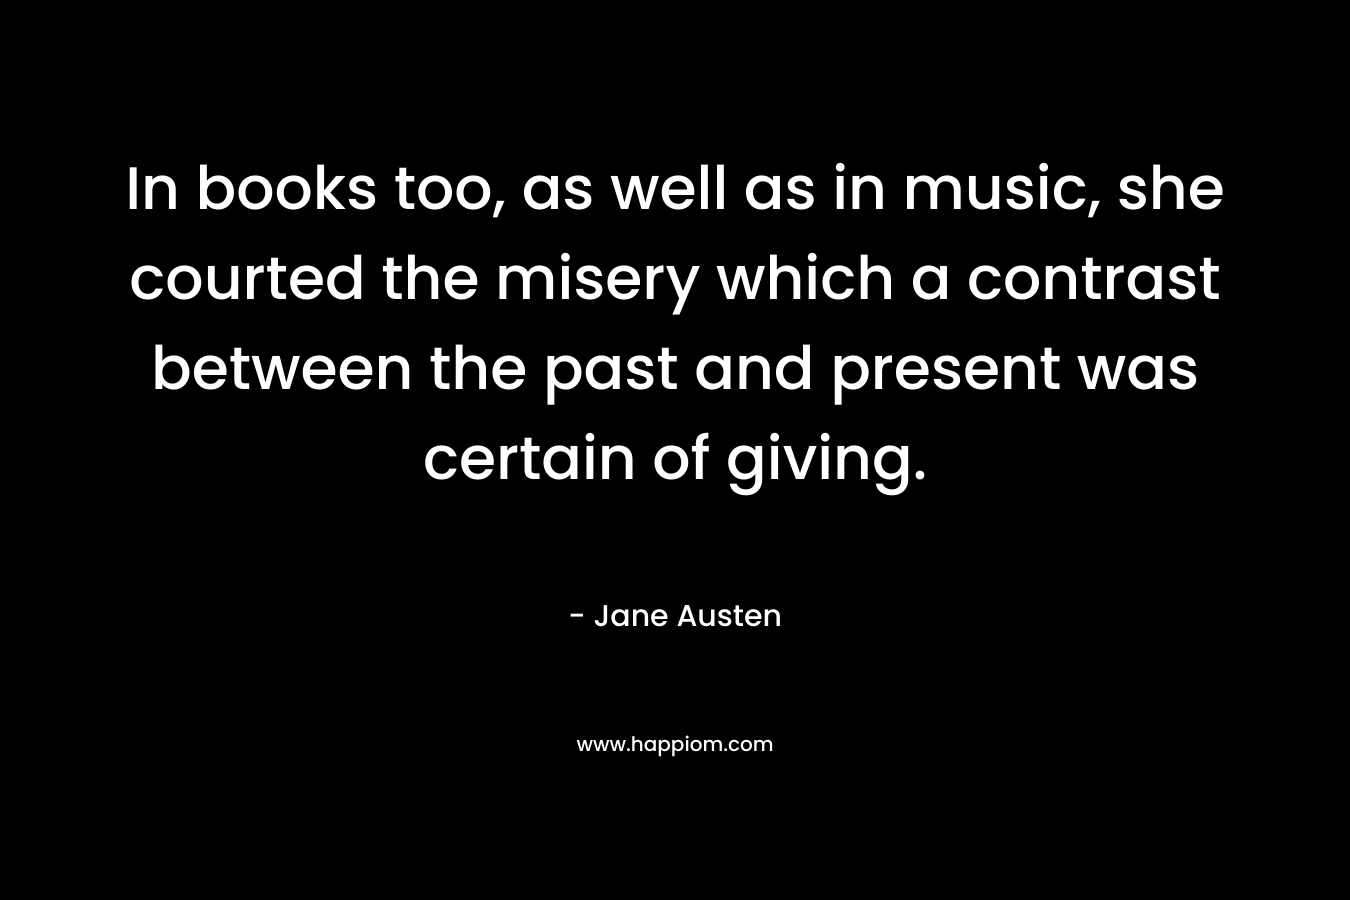 In books too, as well as in music, she courted the misery which a contrast between the past and present was certain of giving. – Jane Austen